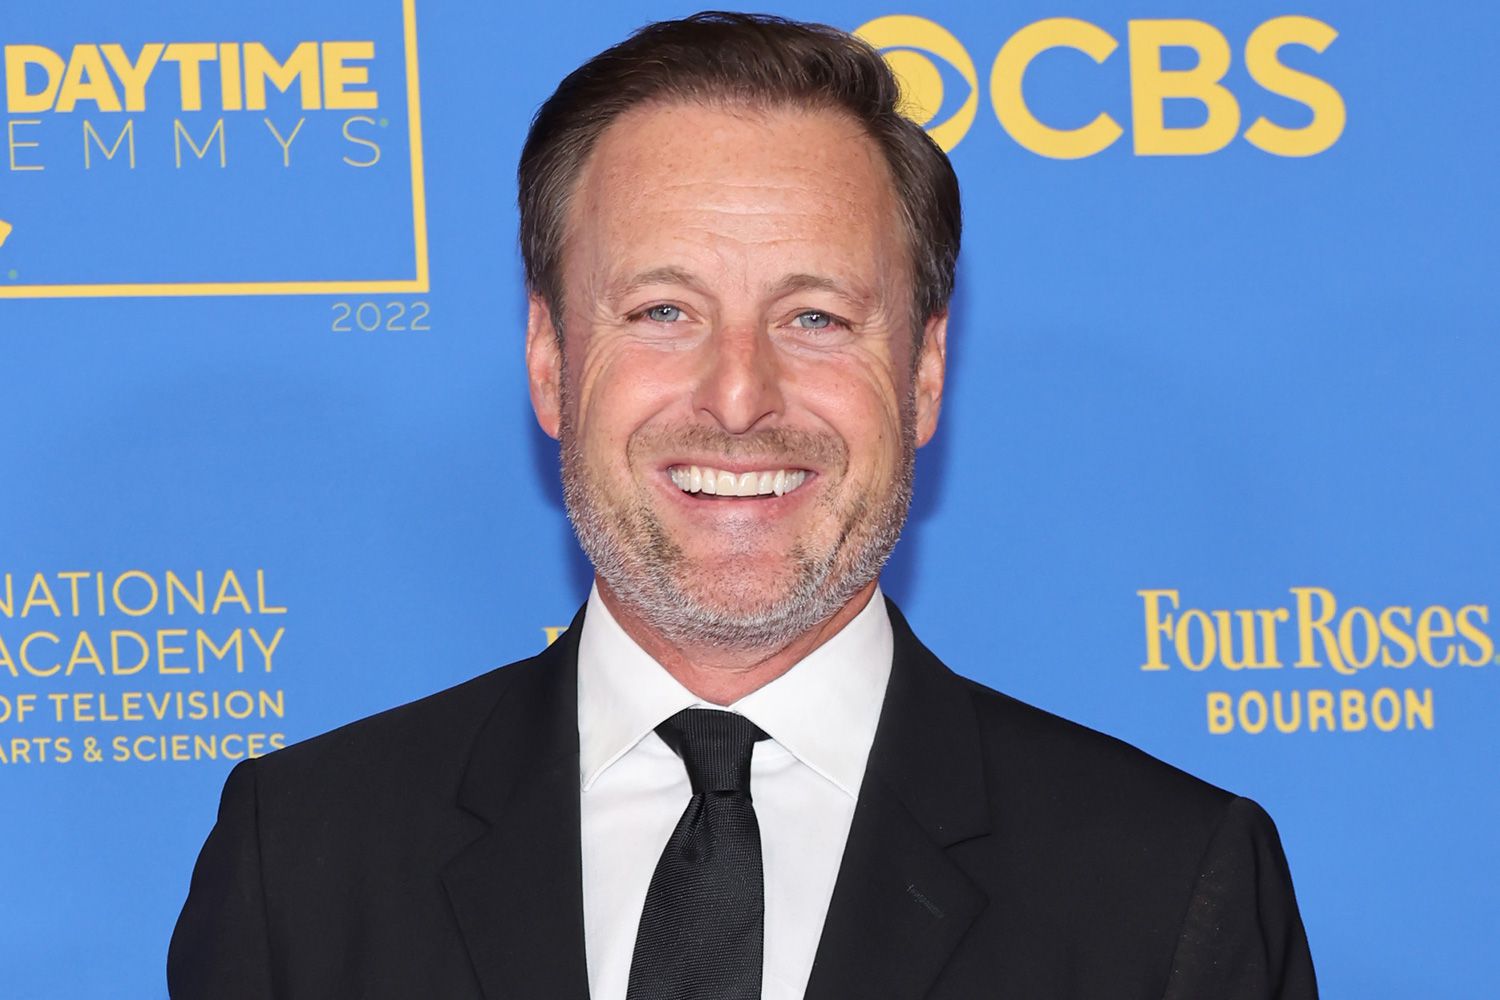 Chris Harrison Criticizes ‘The Bachelor’ As ‘Toxic’ Two Years After Racism Scandal